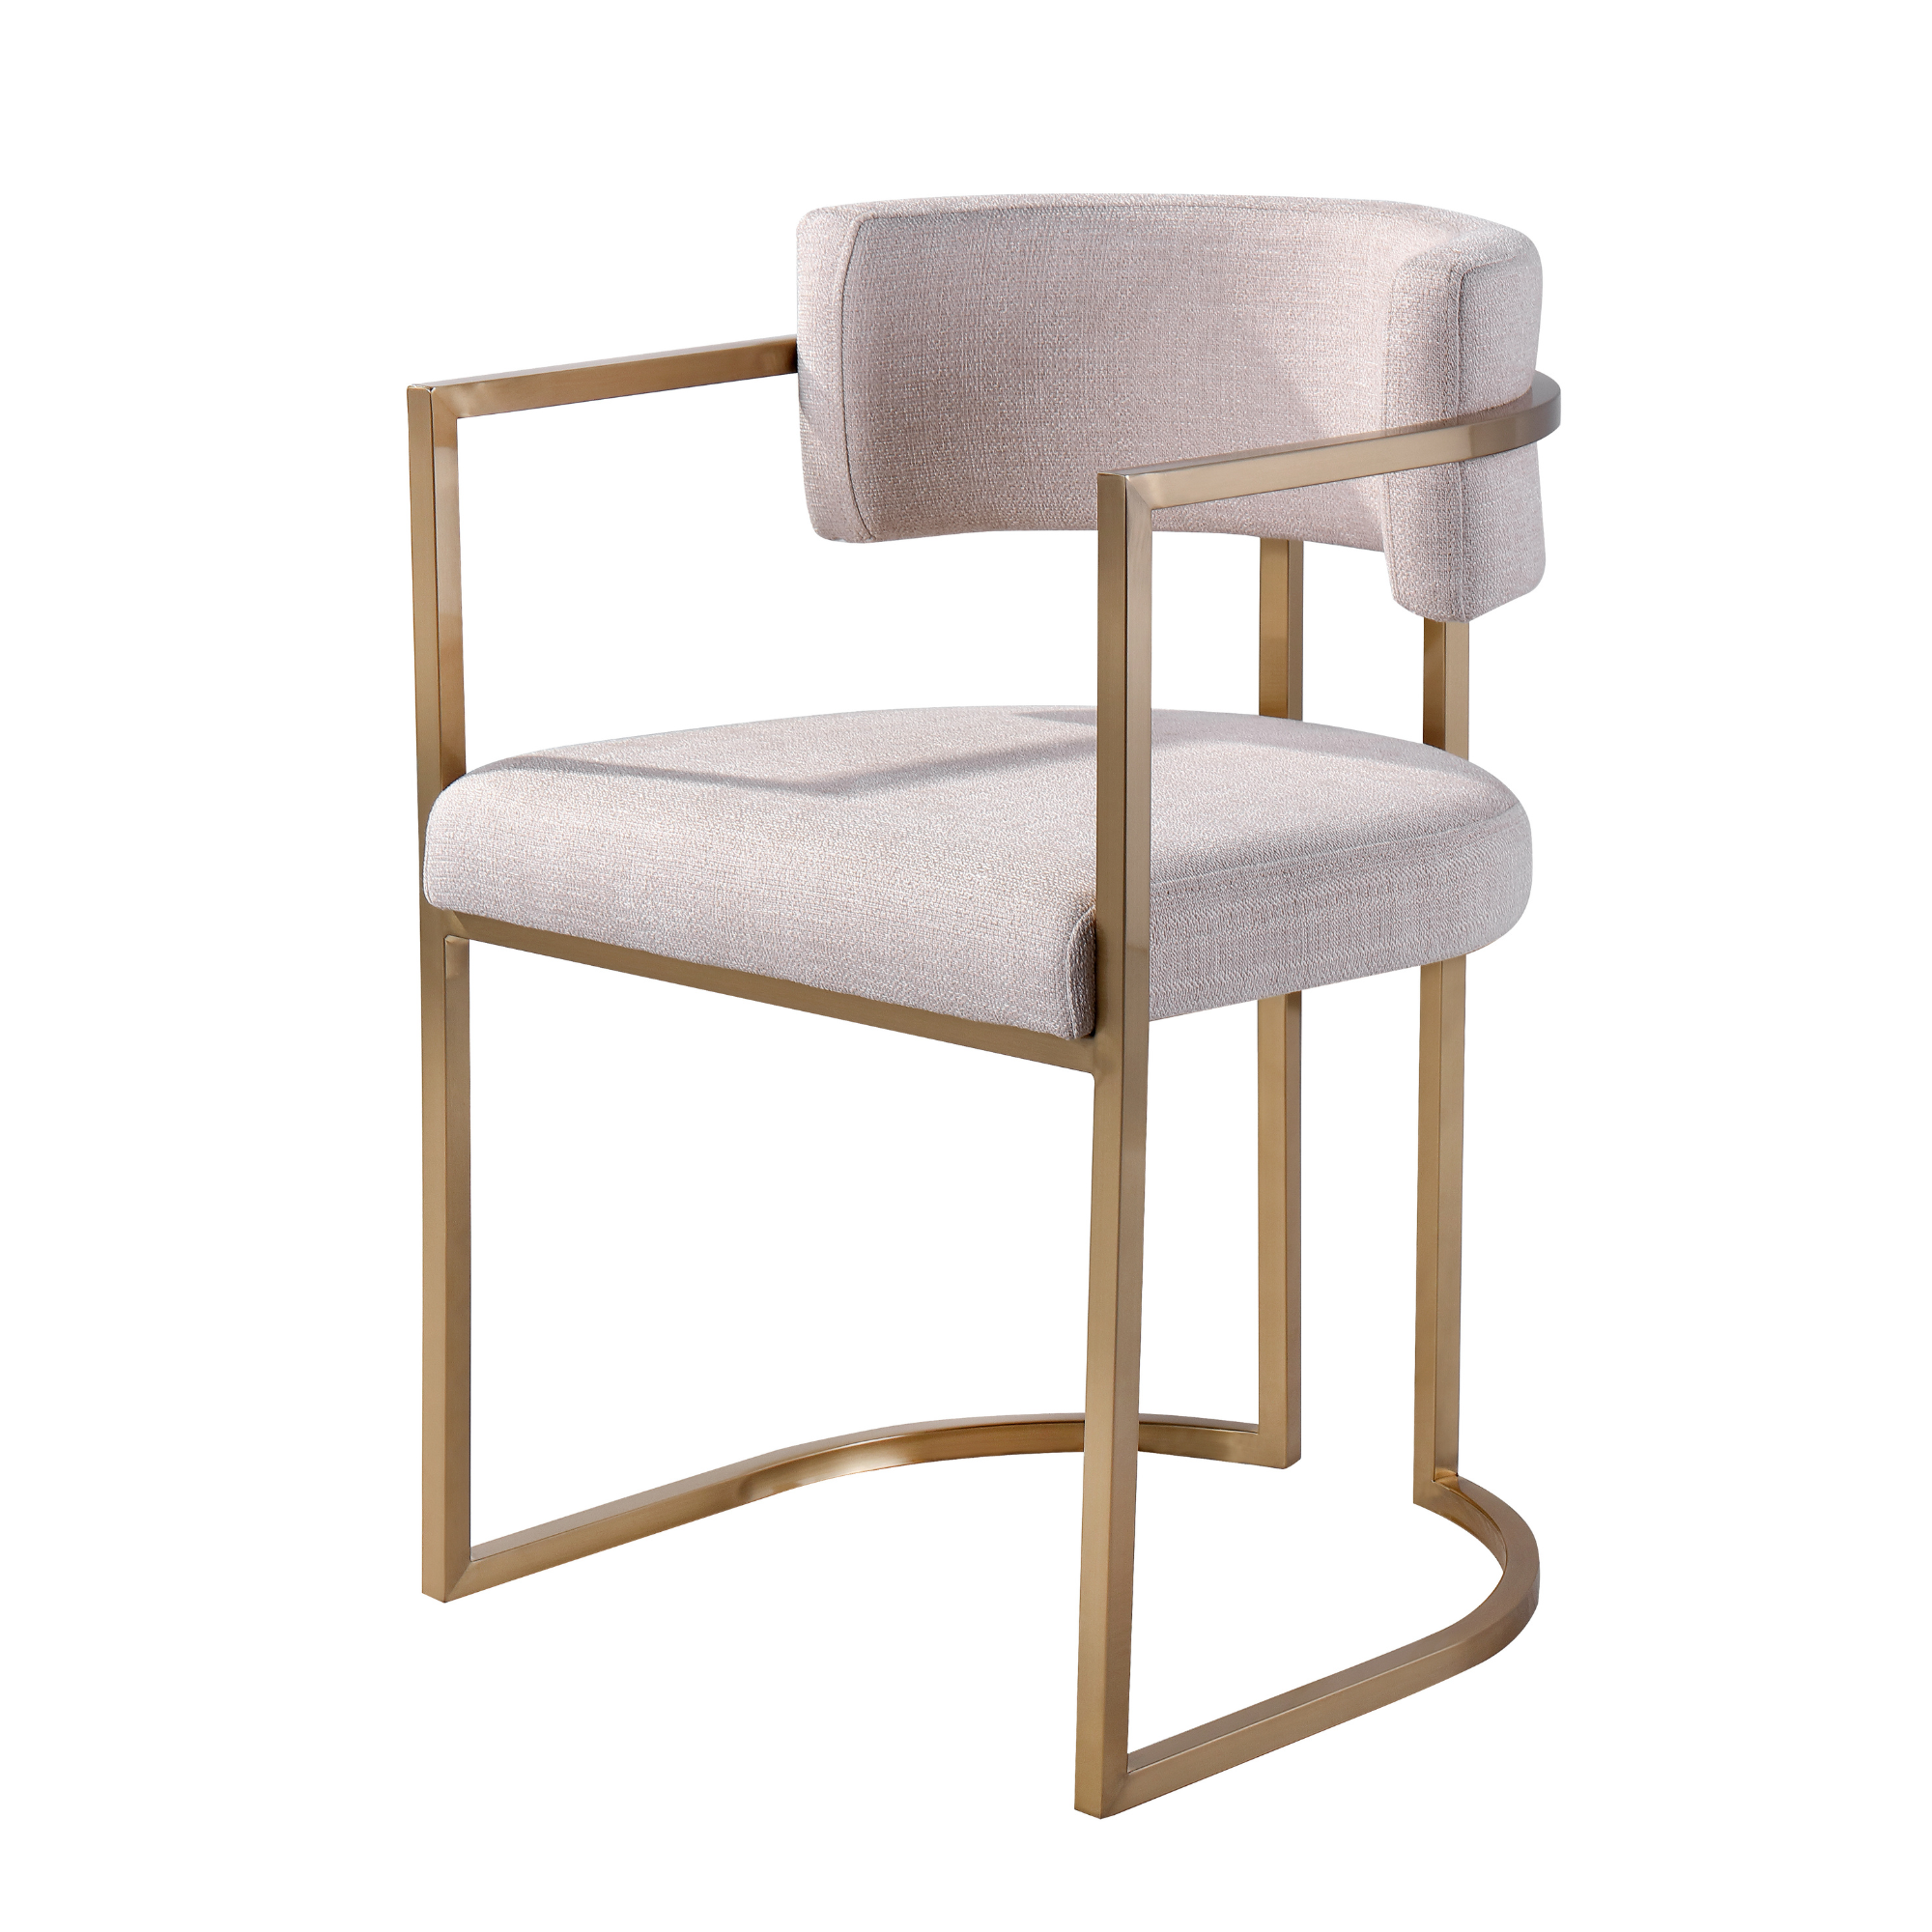 Roots Alexa Beige Dining Chair (8785019175233)